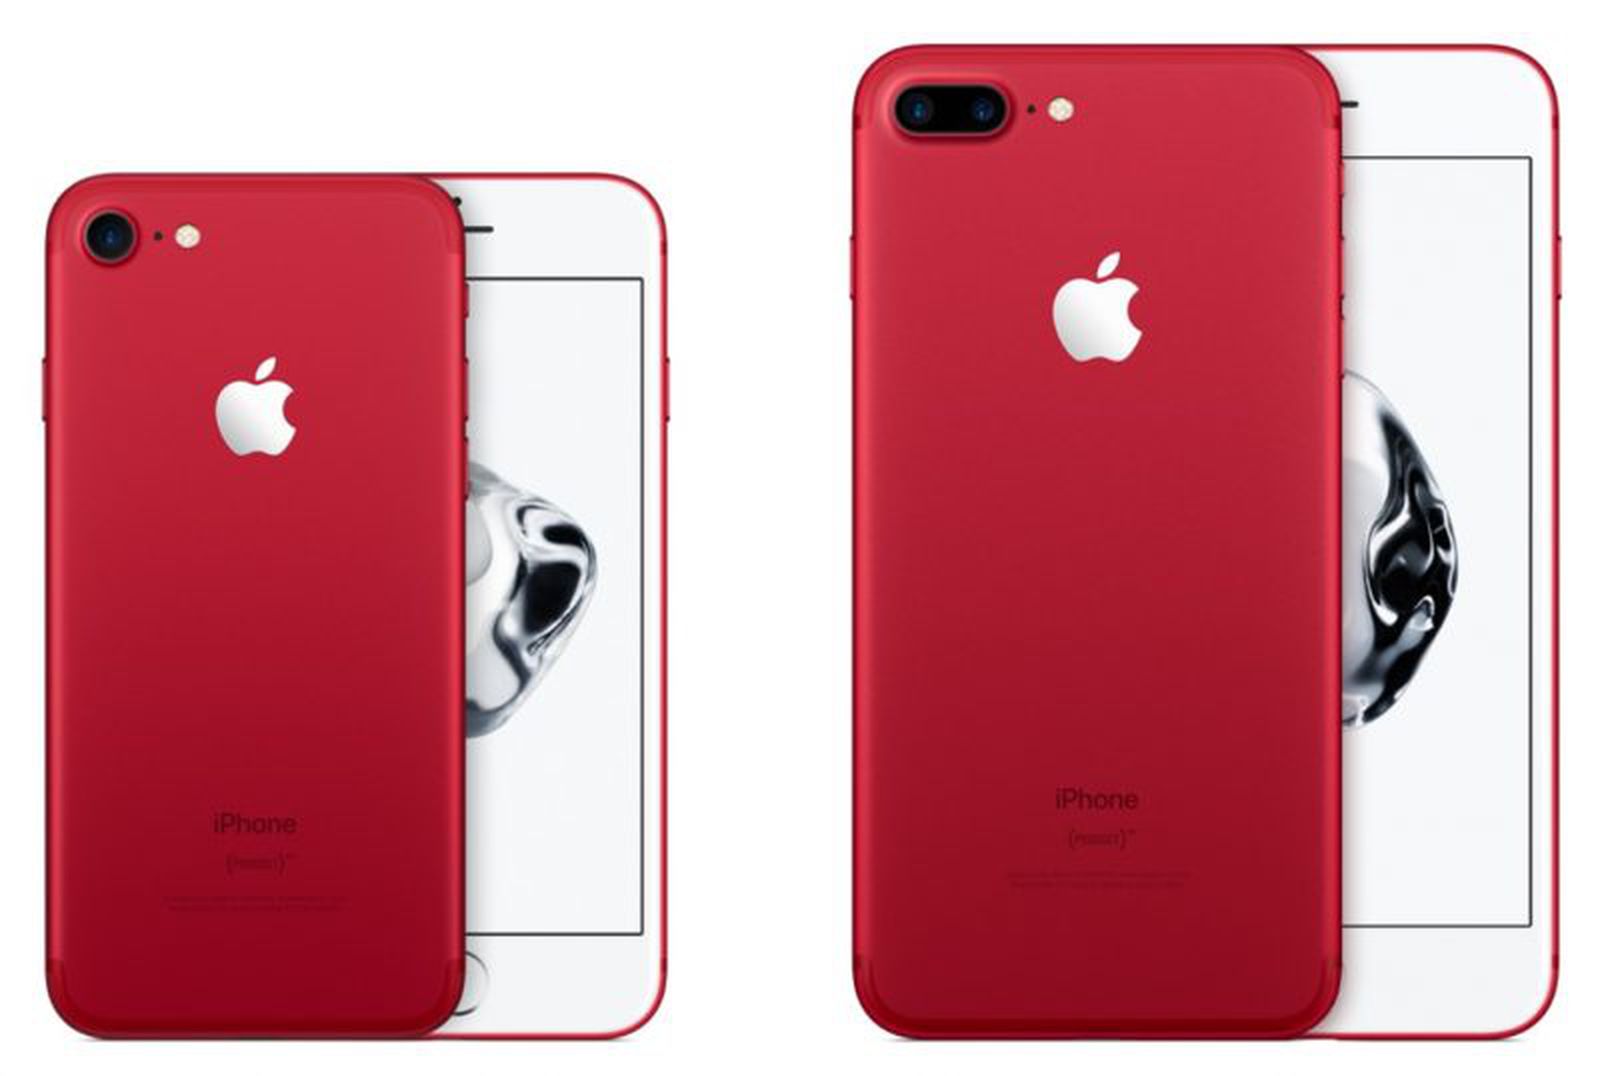 Apple introduces iPhone 7 and iPhone 7 Plus (PRODUCT)RED Special Edition -  Apple